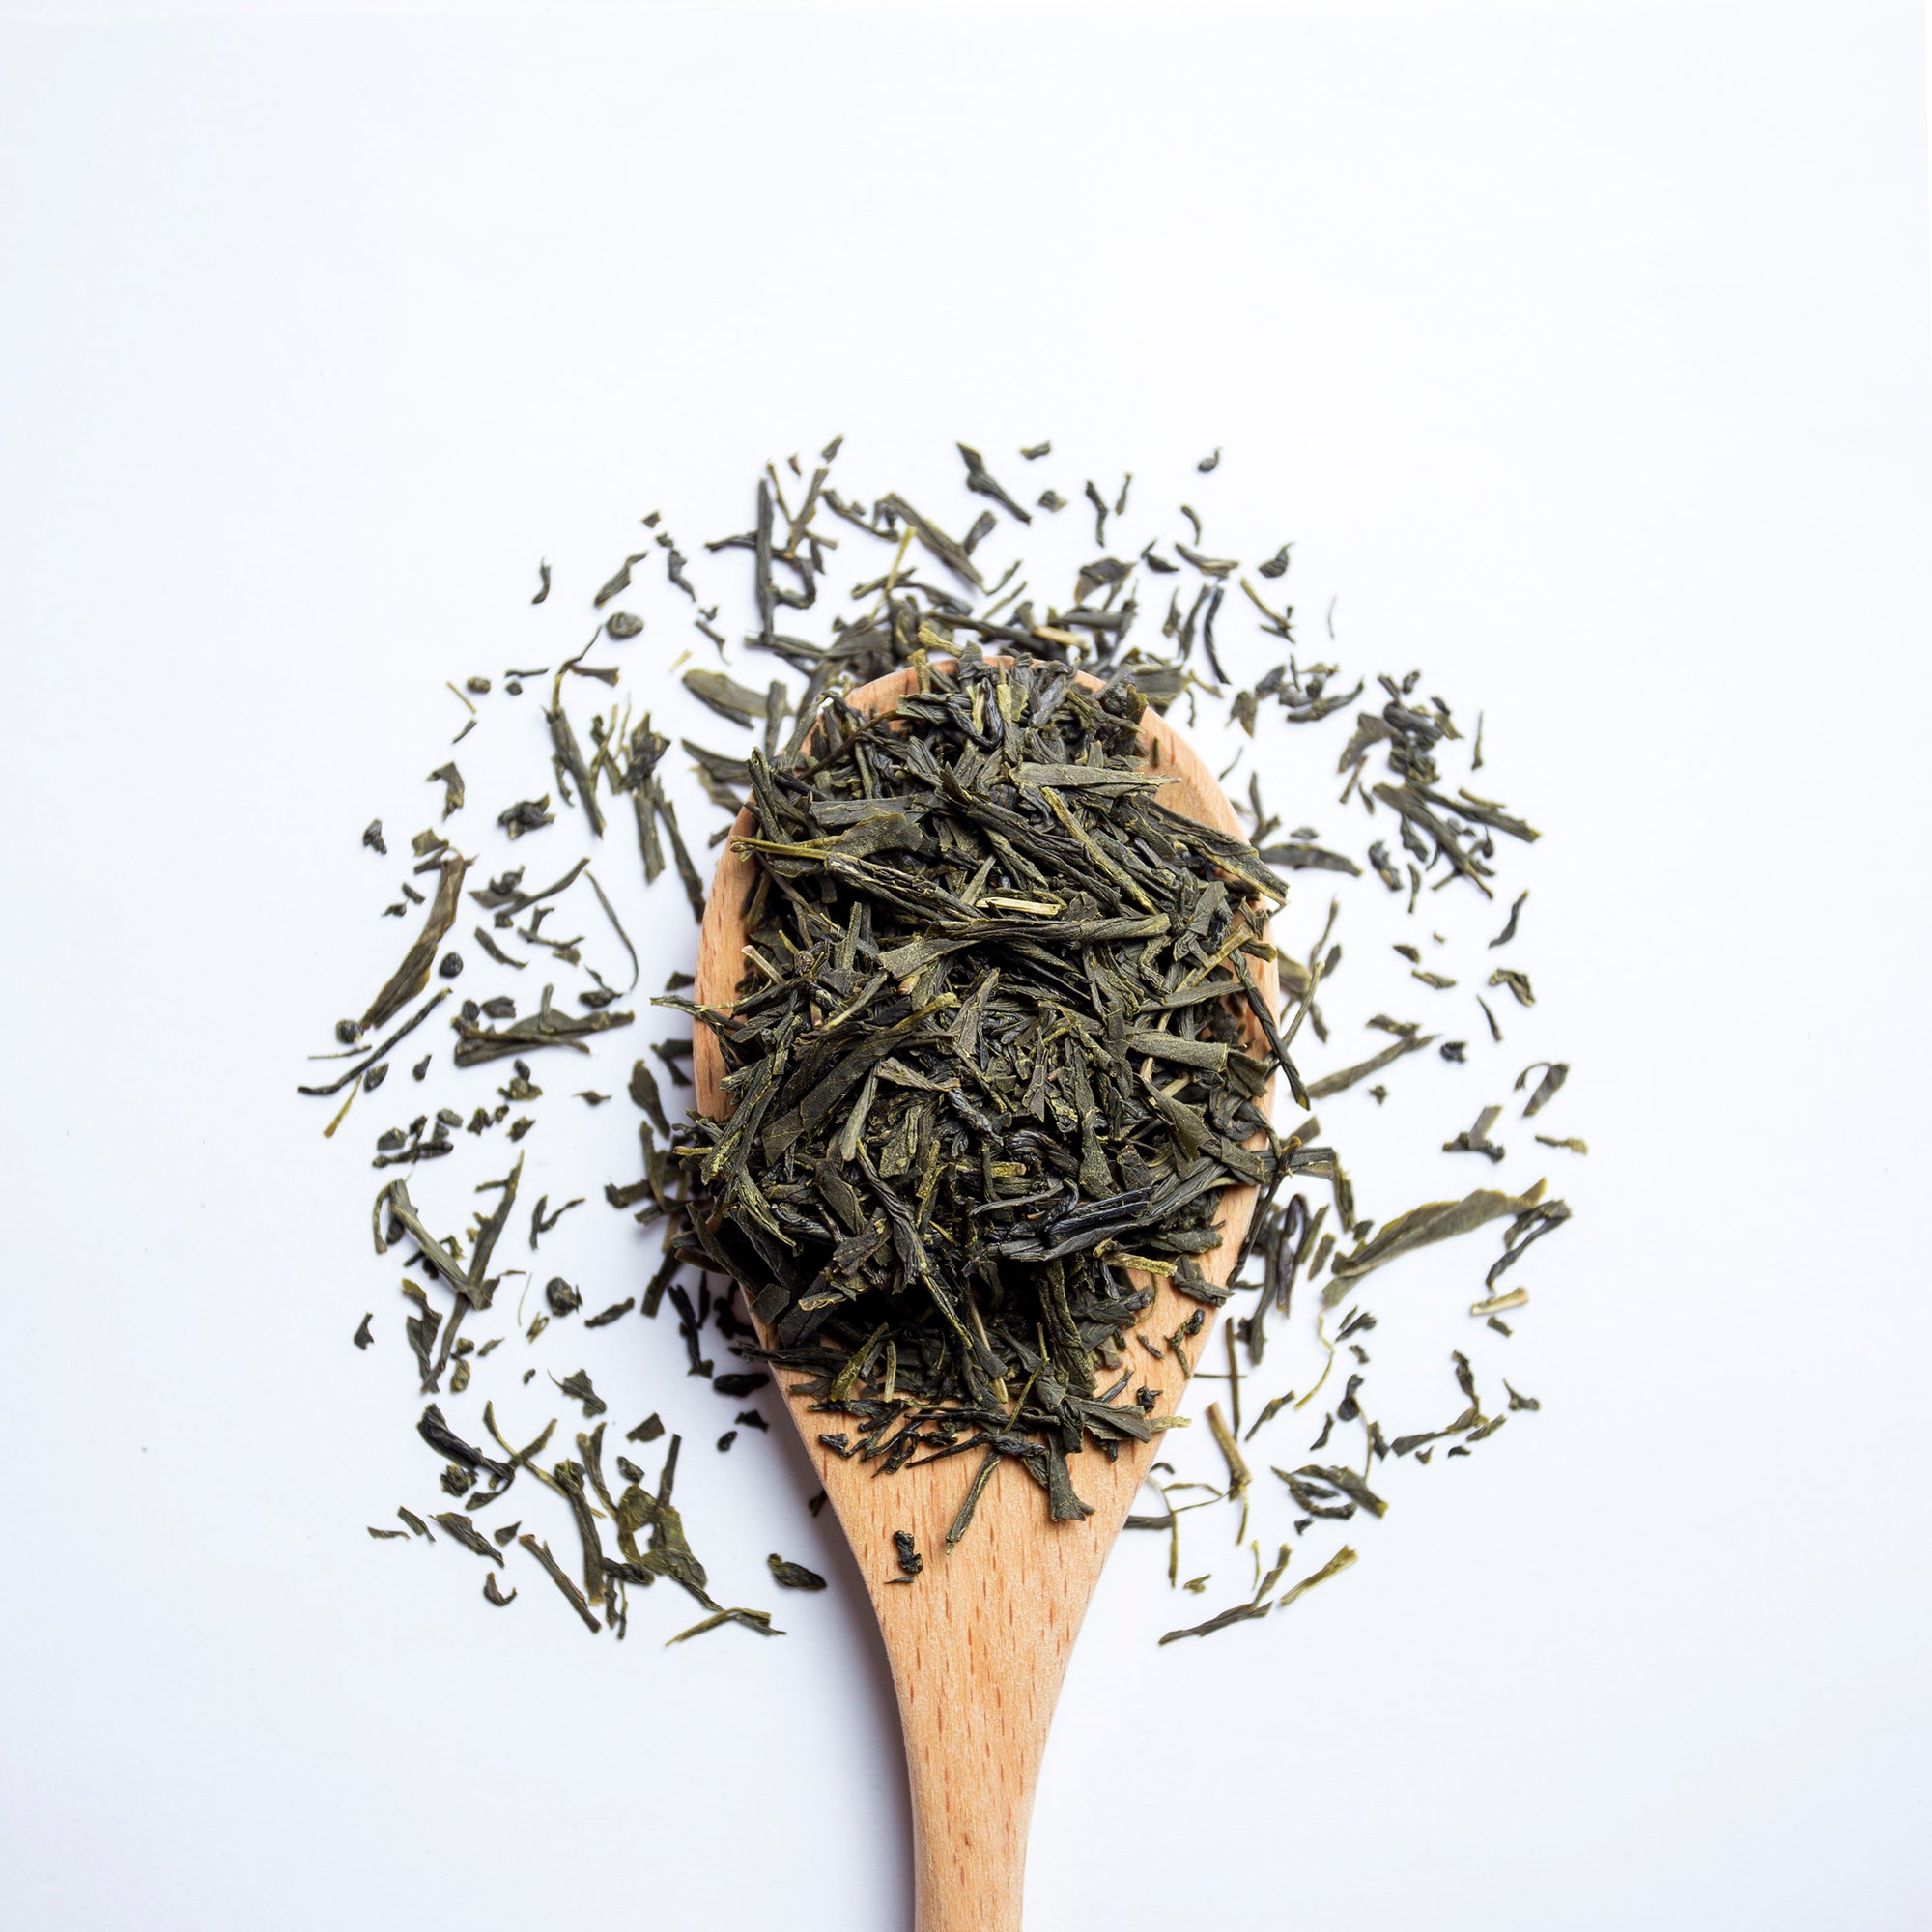 Debunking the Myths: Examining the Relationship between Green Tea and Weight Loss